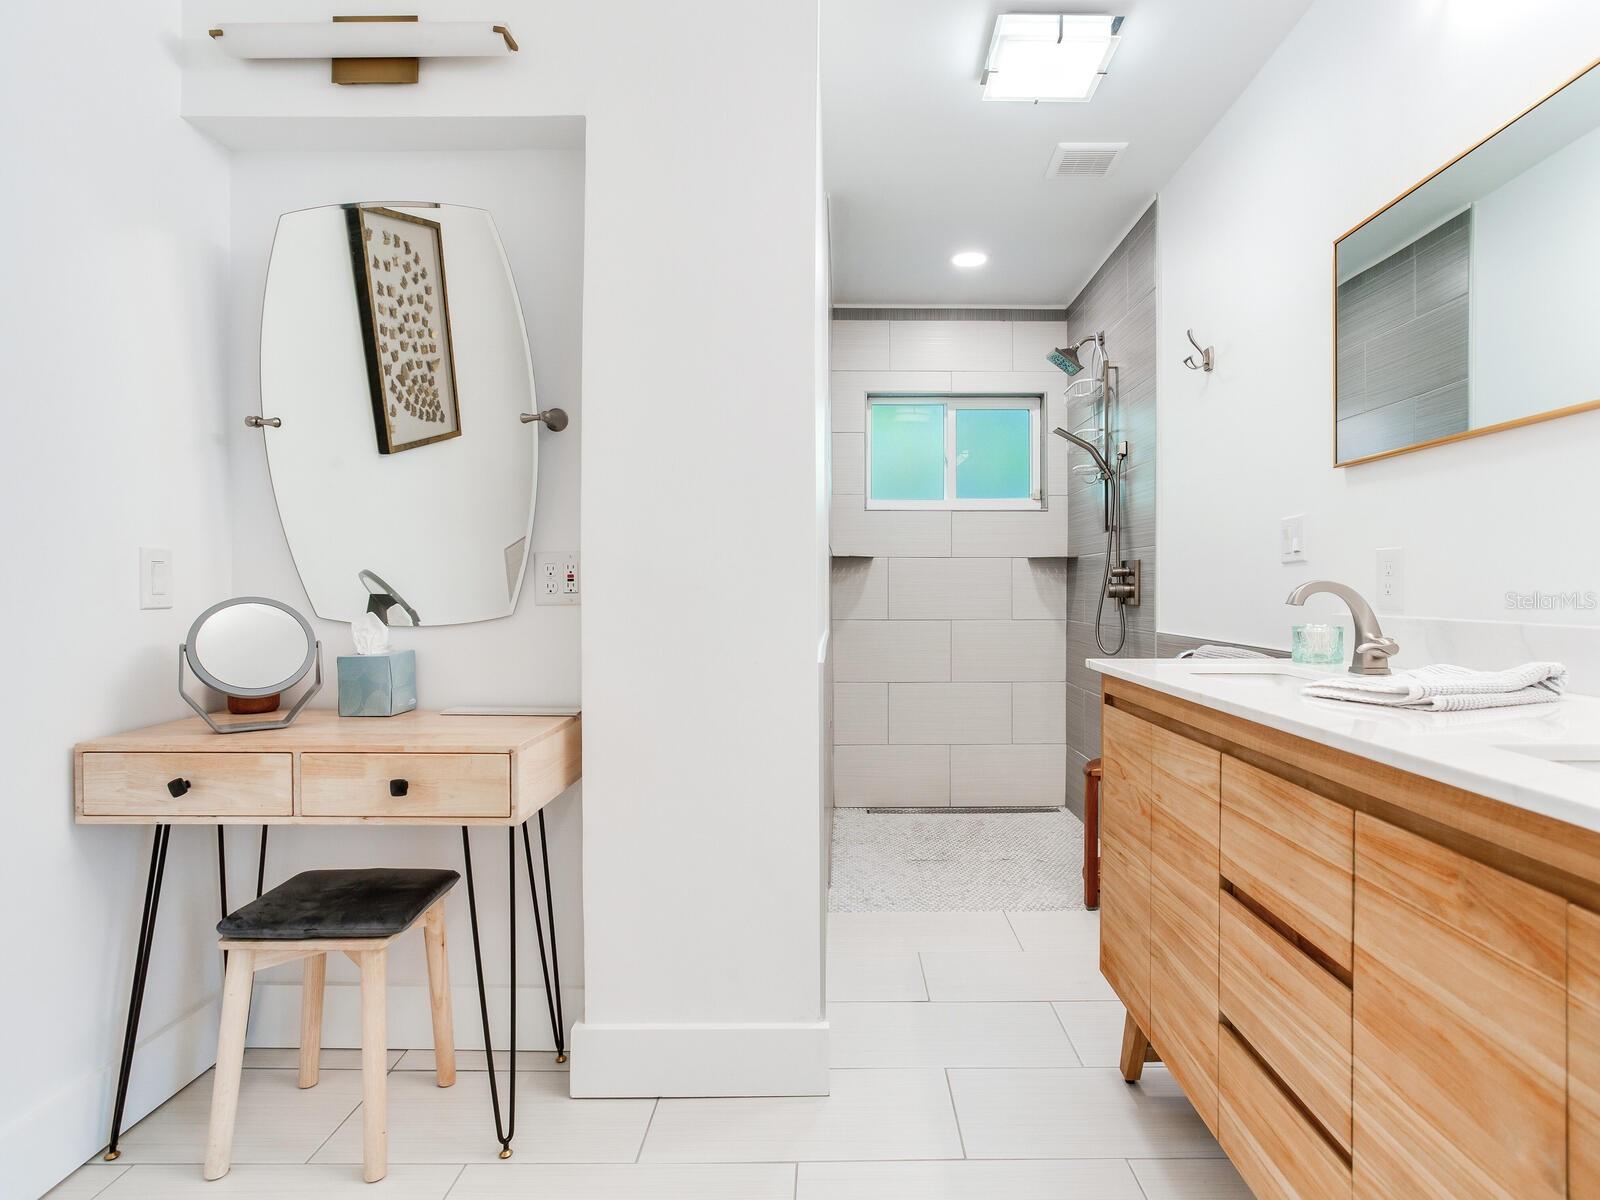 Primary bathroom - Recently built/reconfigured and updated with no-curb shower, double sink vanity, and lighted make-up area.